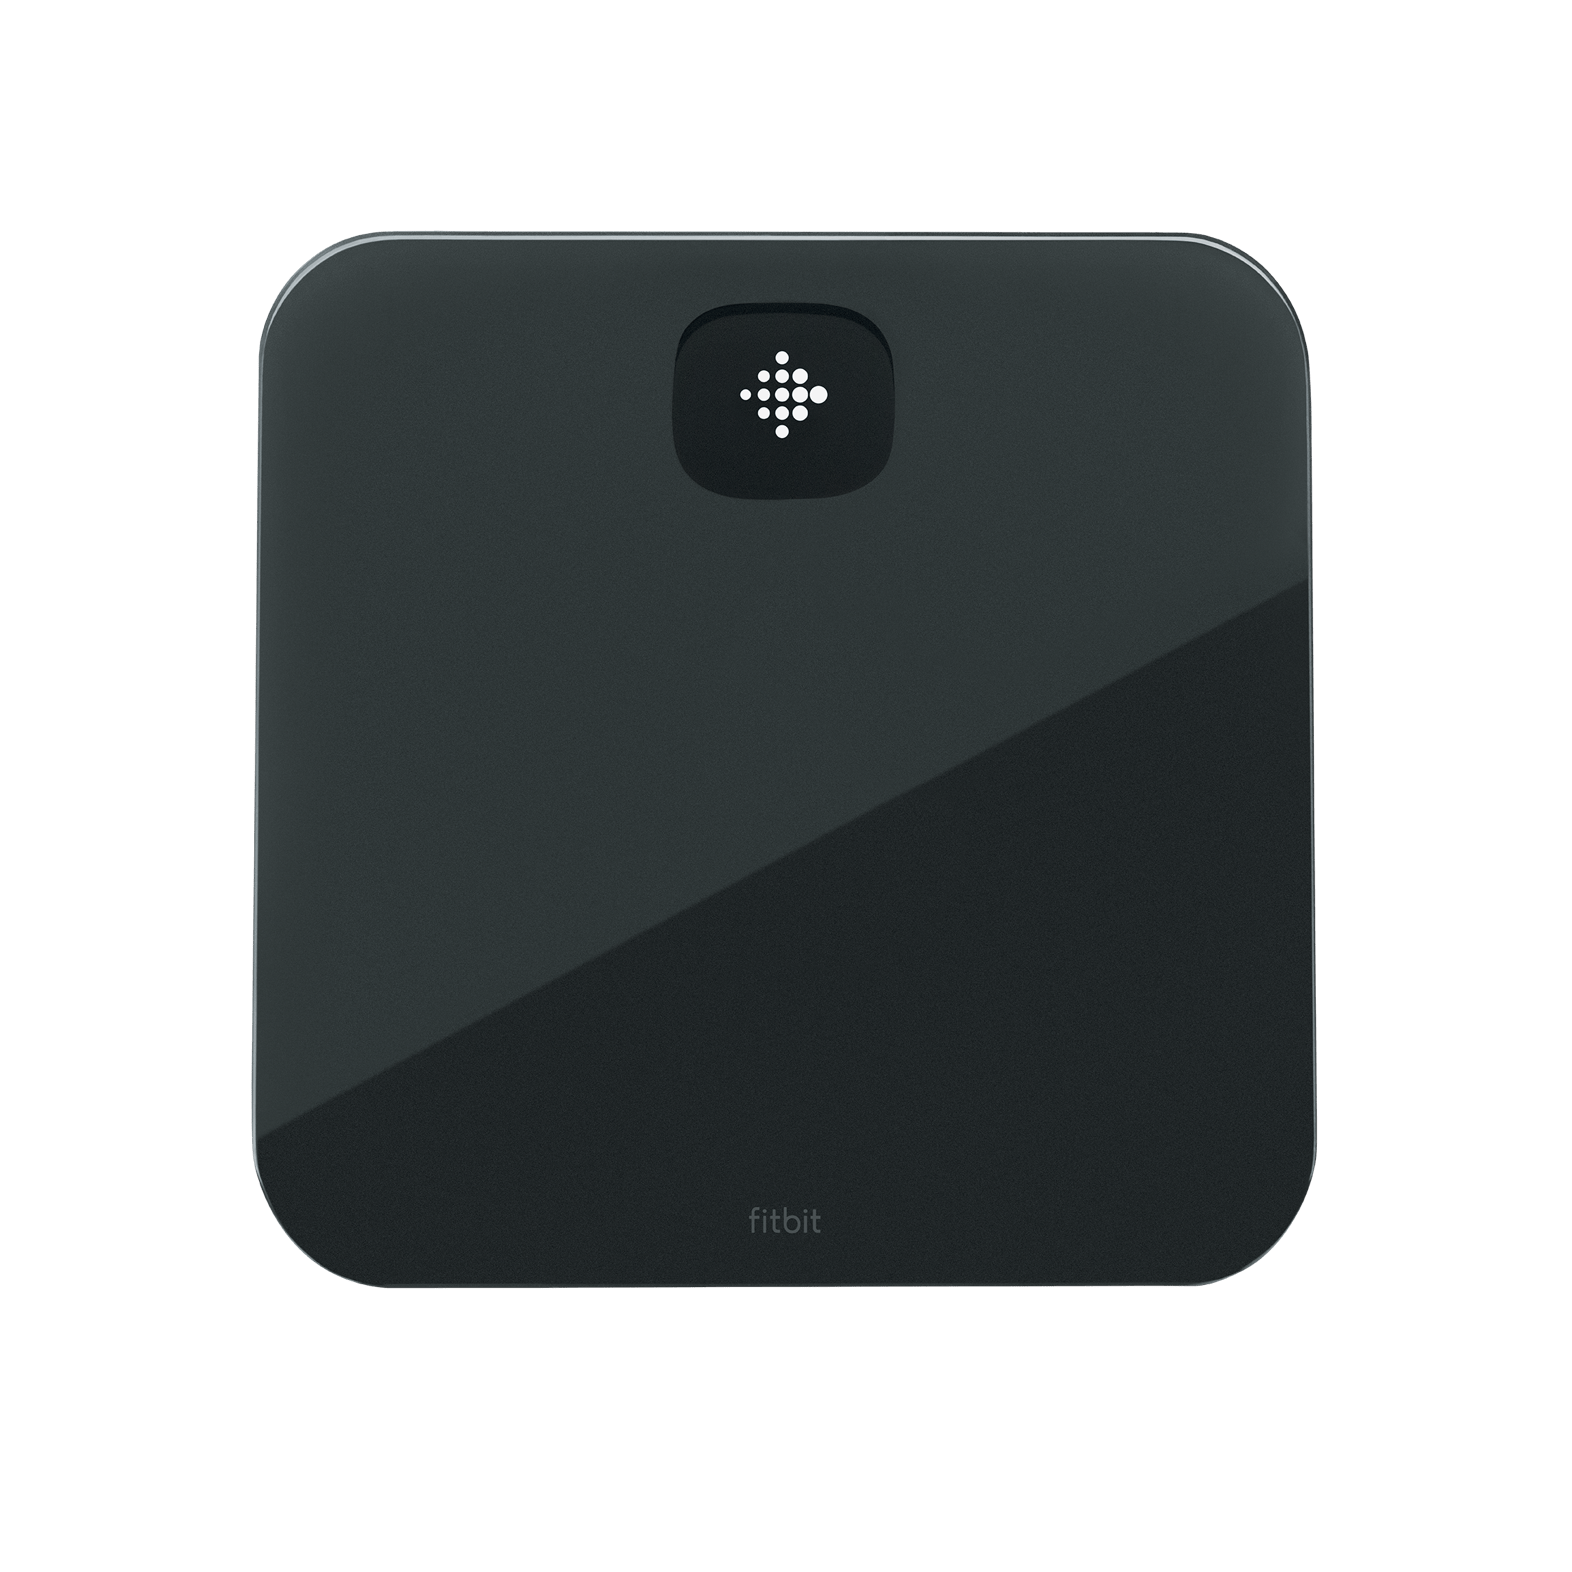 fitbit scale price